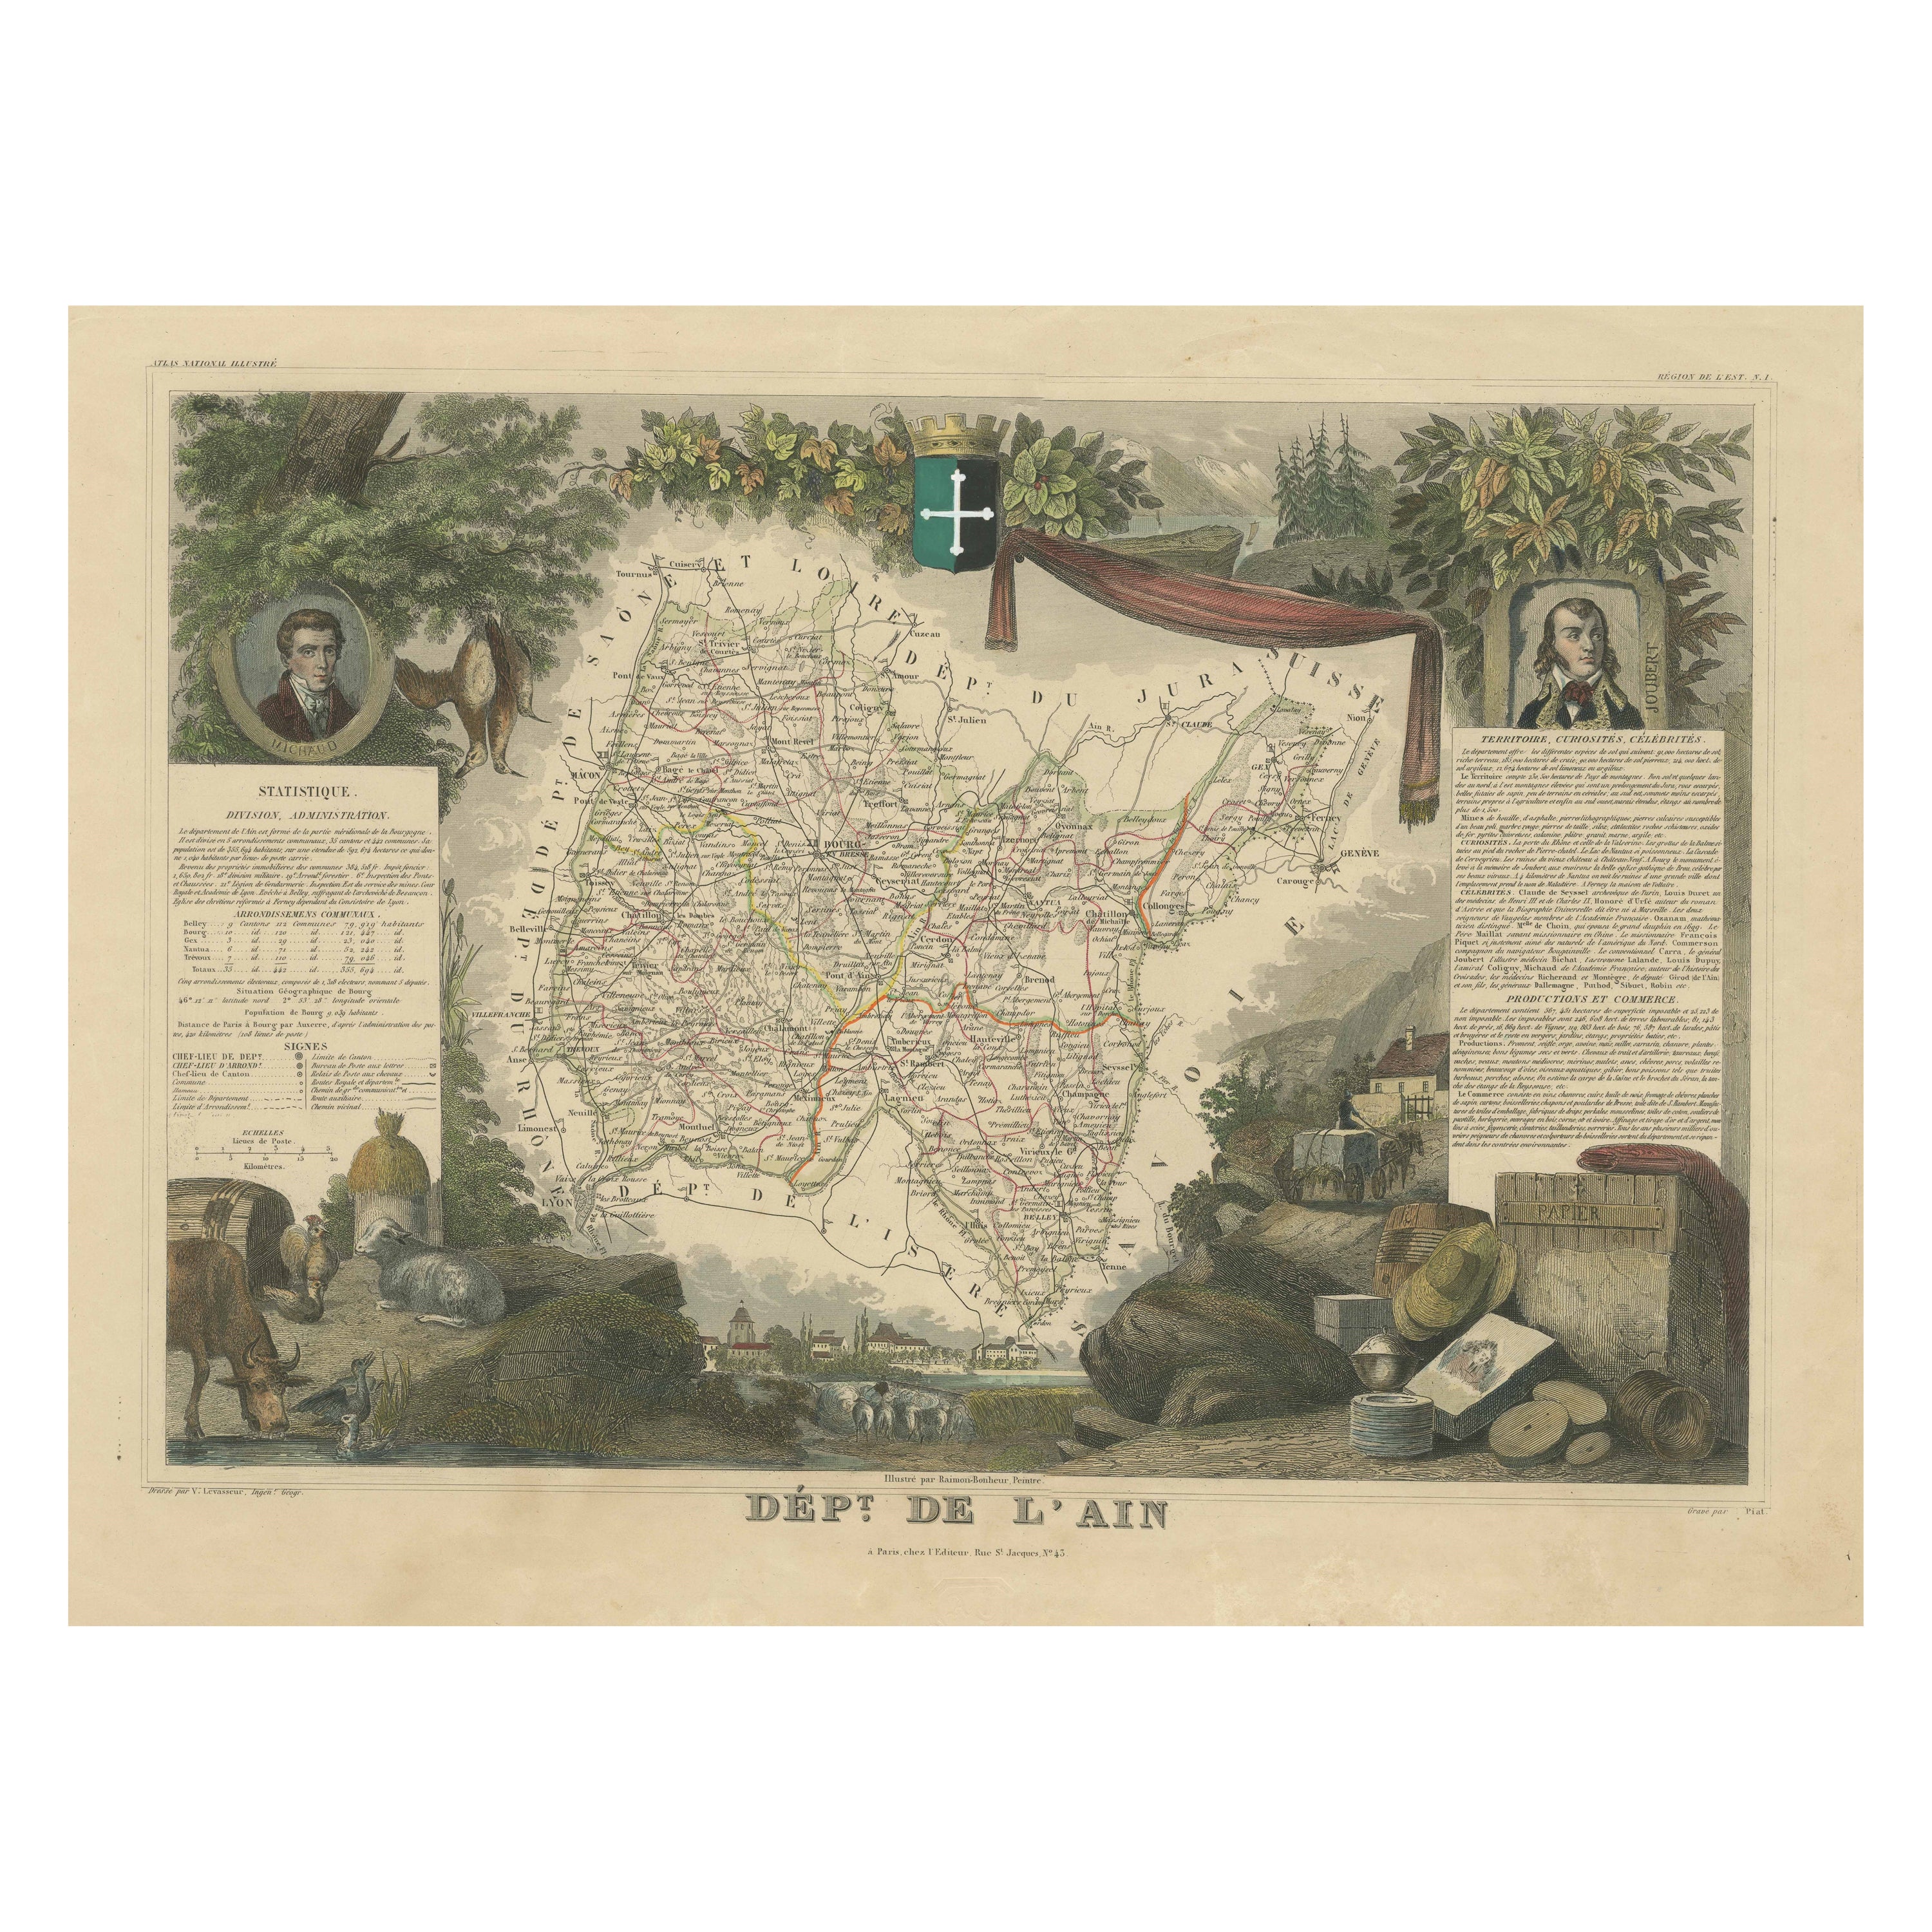 Old Map of the French Department of L'ain, France For Sale